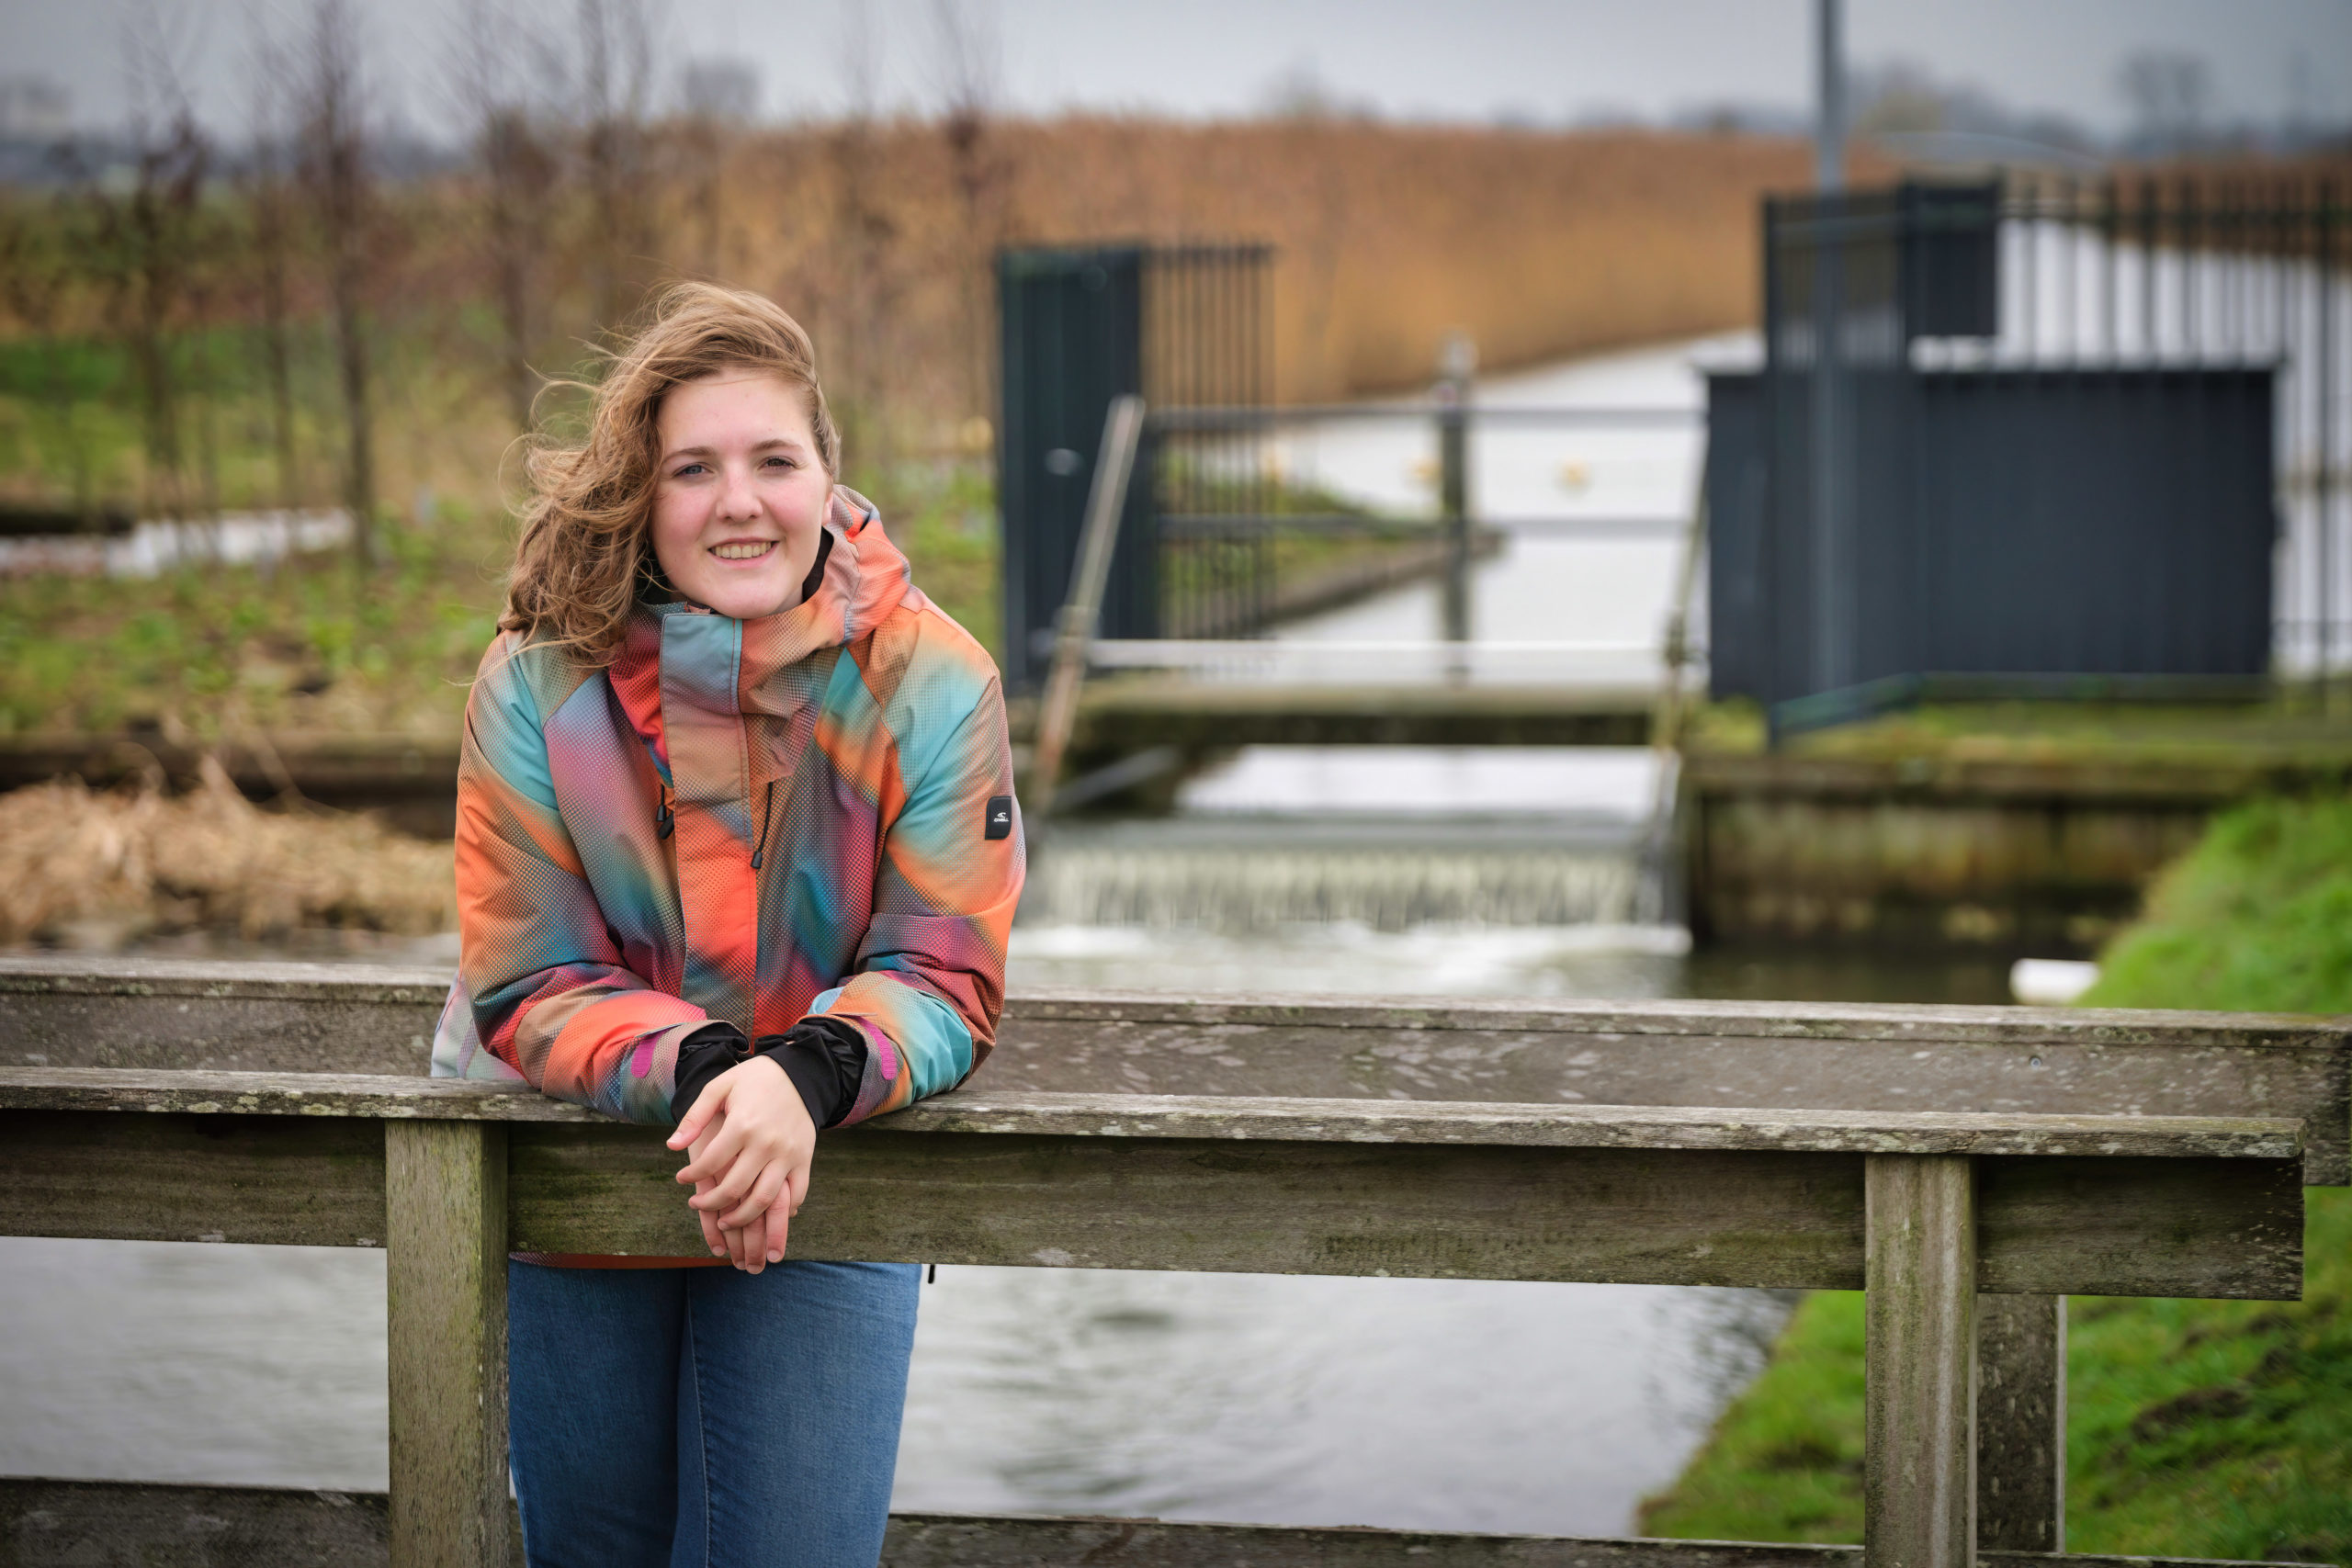 WUR student makes it to Water Authority board